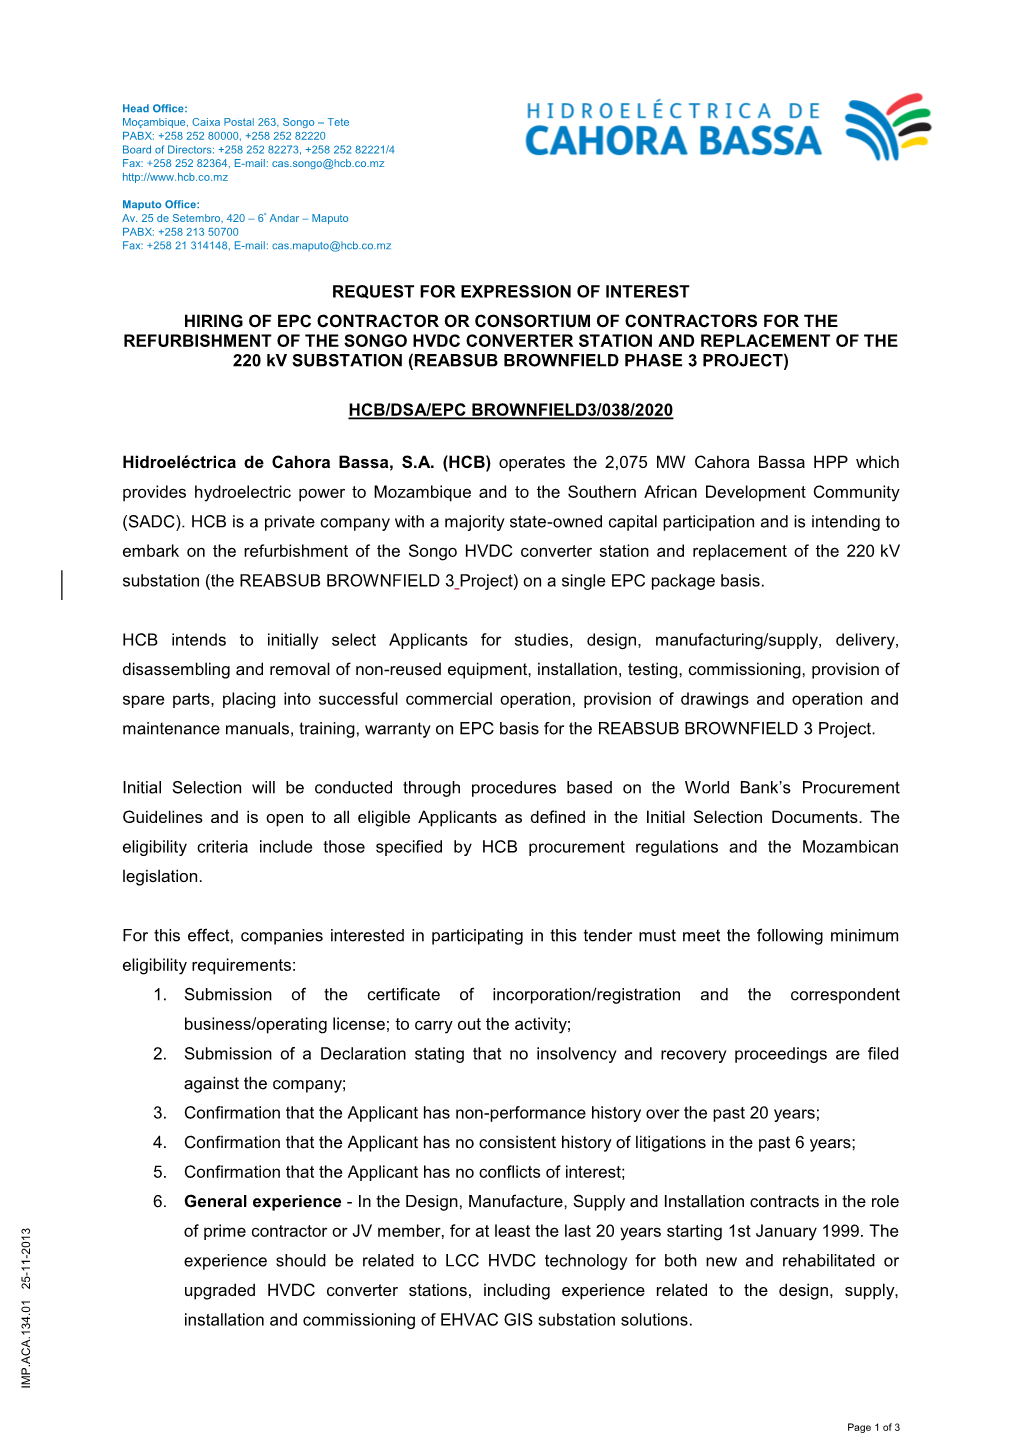 Request for Expression of Interest Hiring of Epc Contractor Or Consortium of Contractors for the Refurbishment of the Songo Hvdc